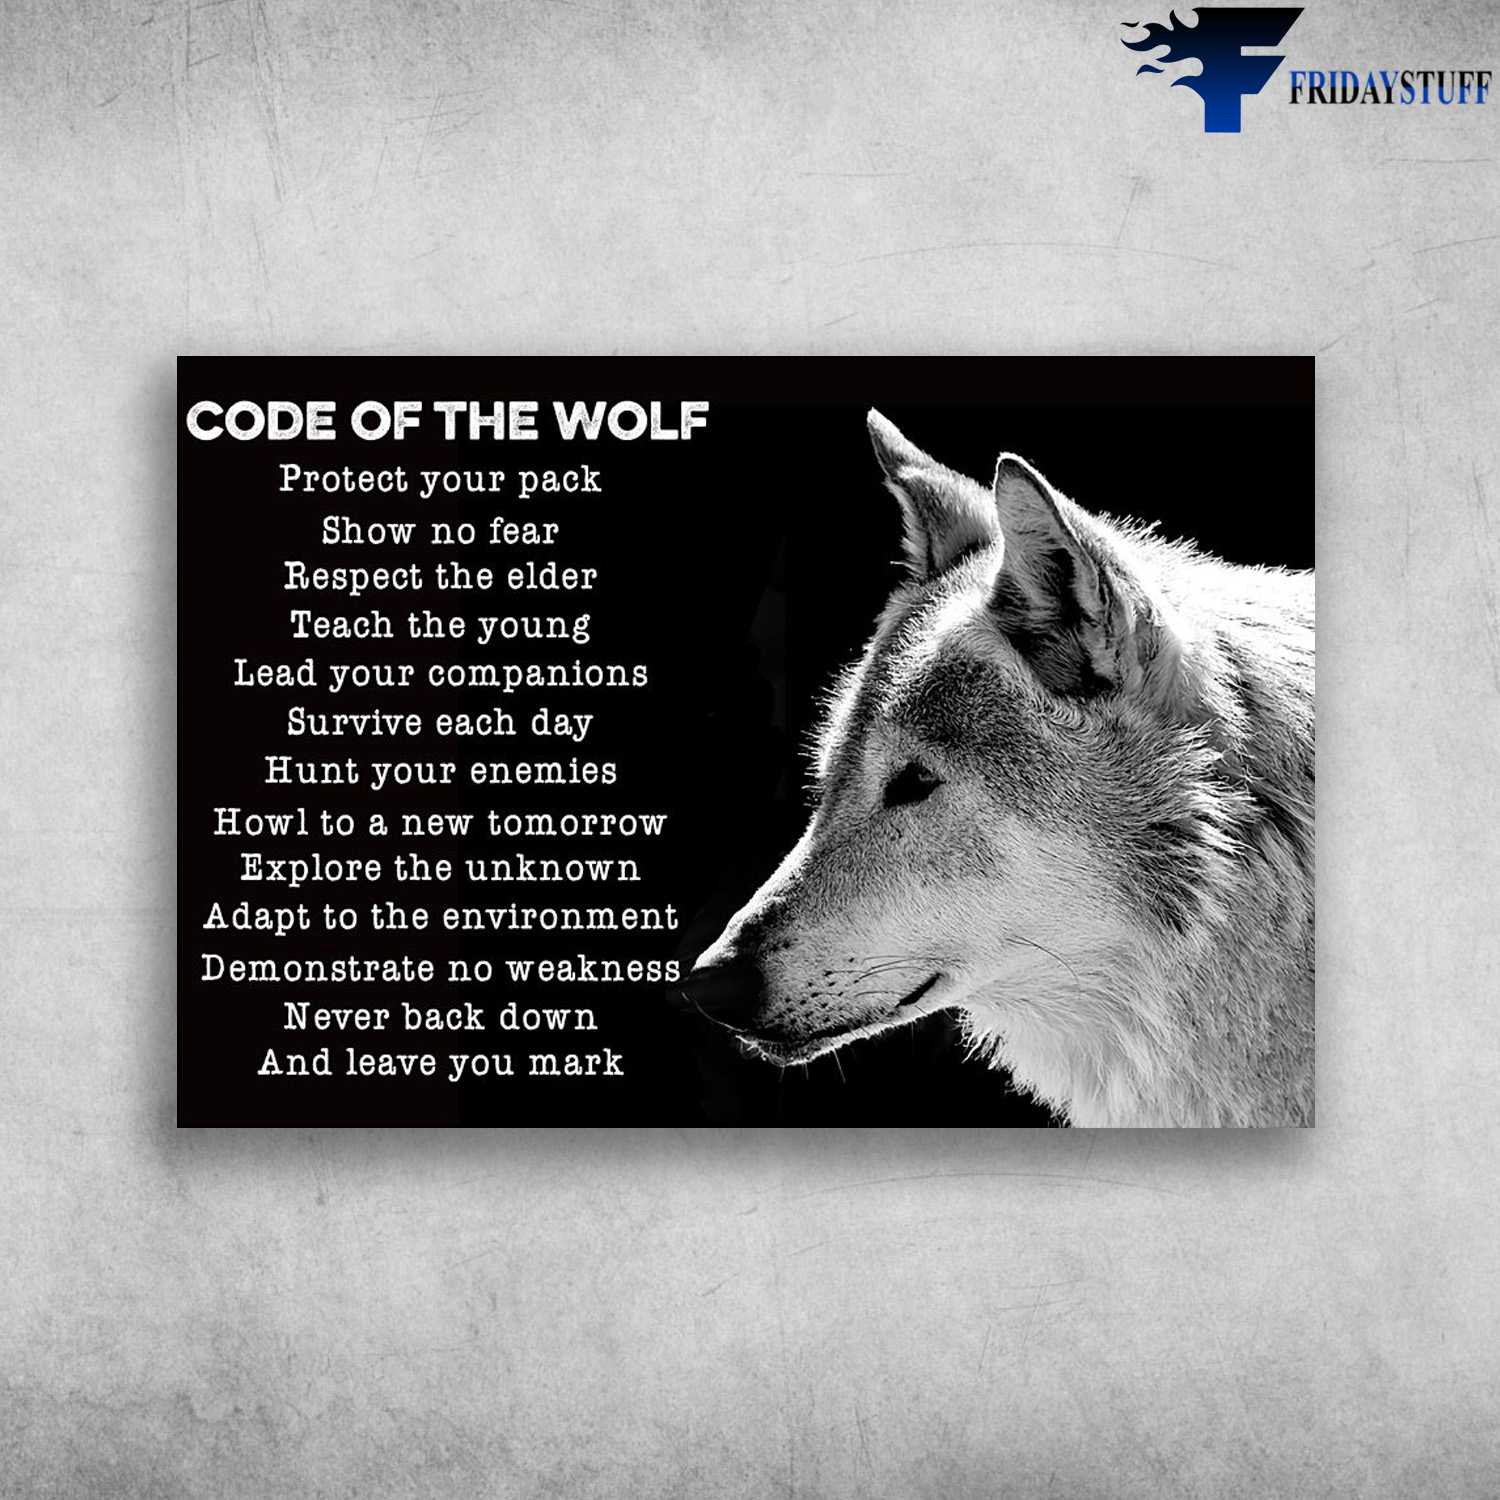 Code Of The Wolf - Protect Your Back, Show No Fear, Respect The Elder, Teach The Young, Lead Your Companions, Survive Each Day, Hunt Your Enmies, Howl To A New Tomorrow, Explore The Unknown